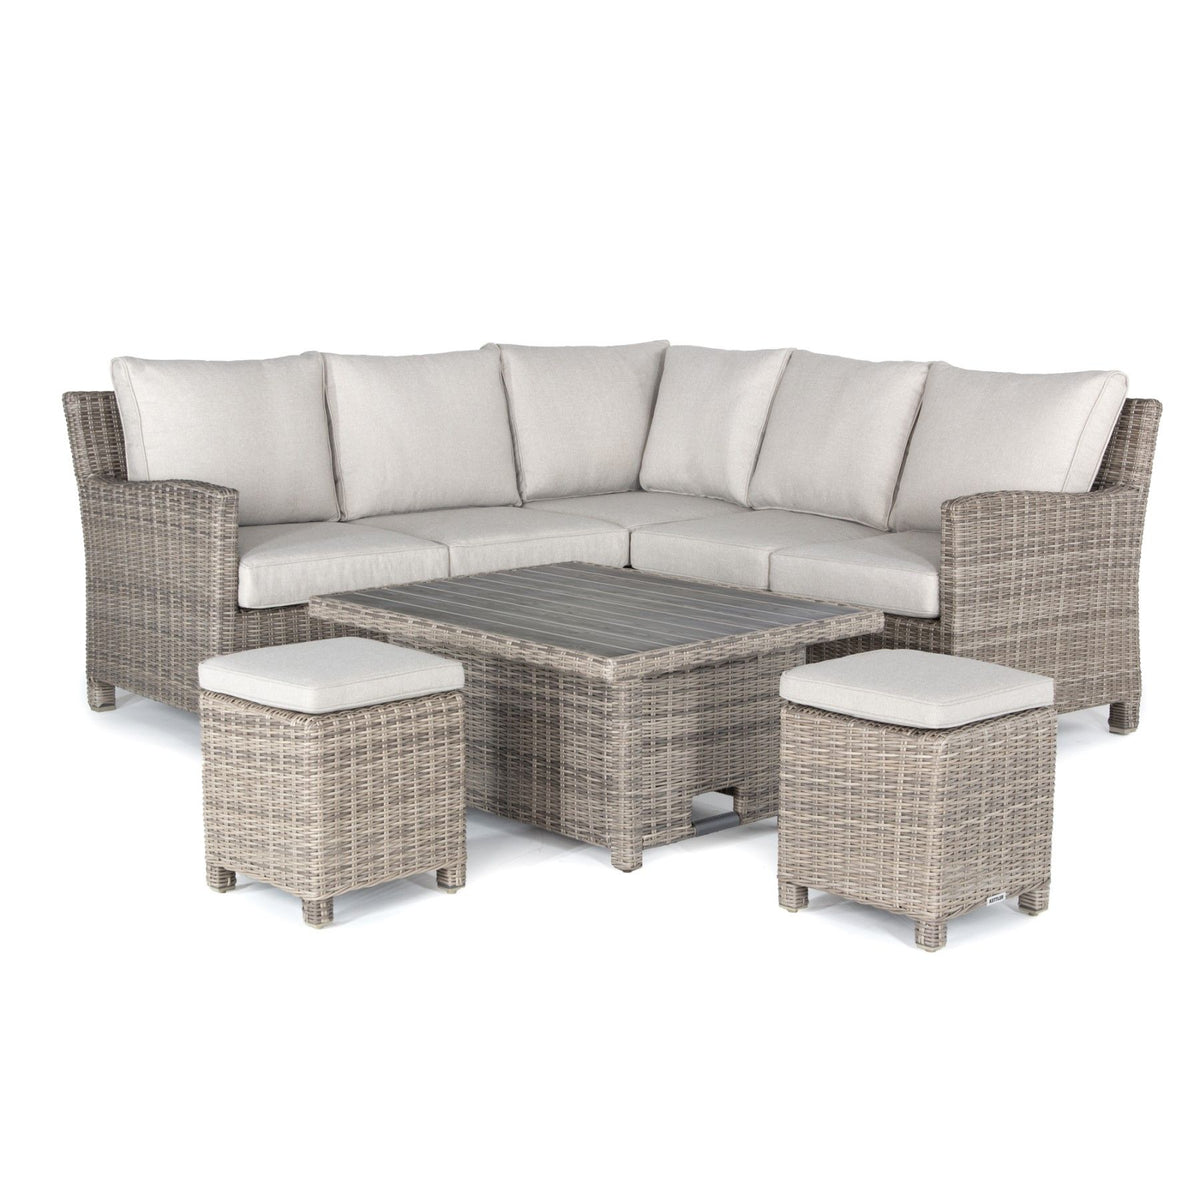 Kettler Palma Signature Mini Corner Oyster Wicker Outdoor Sofa Set with High Low Slat Top Table